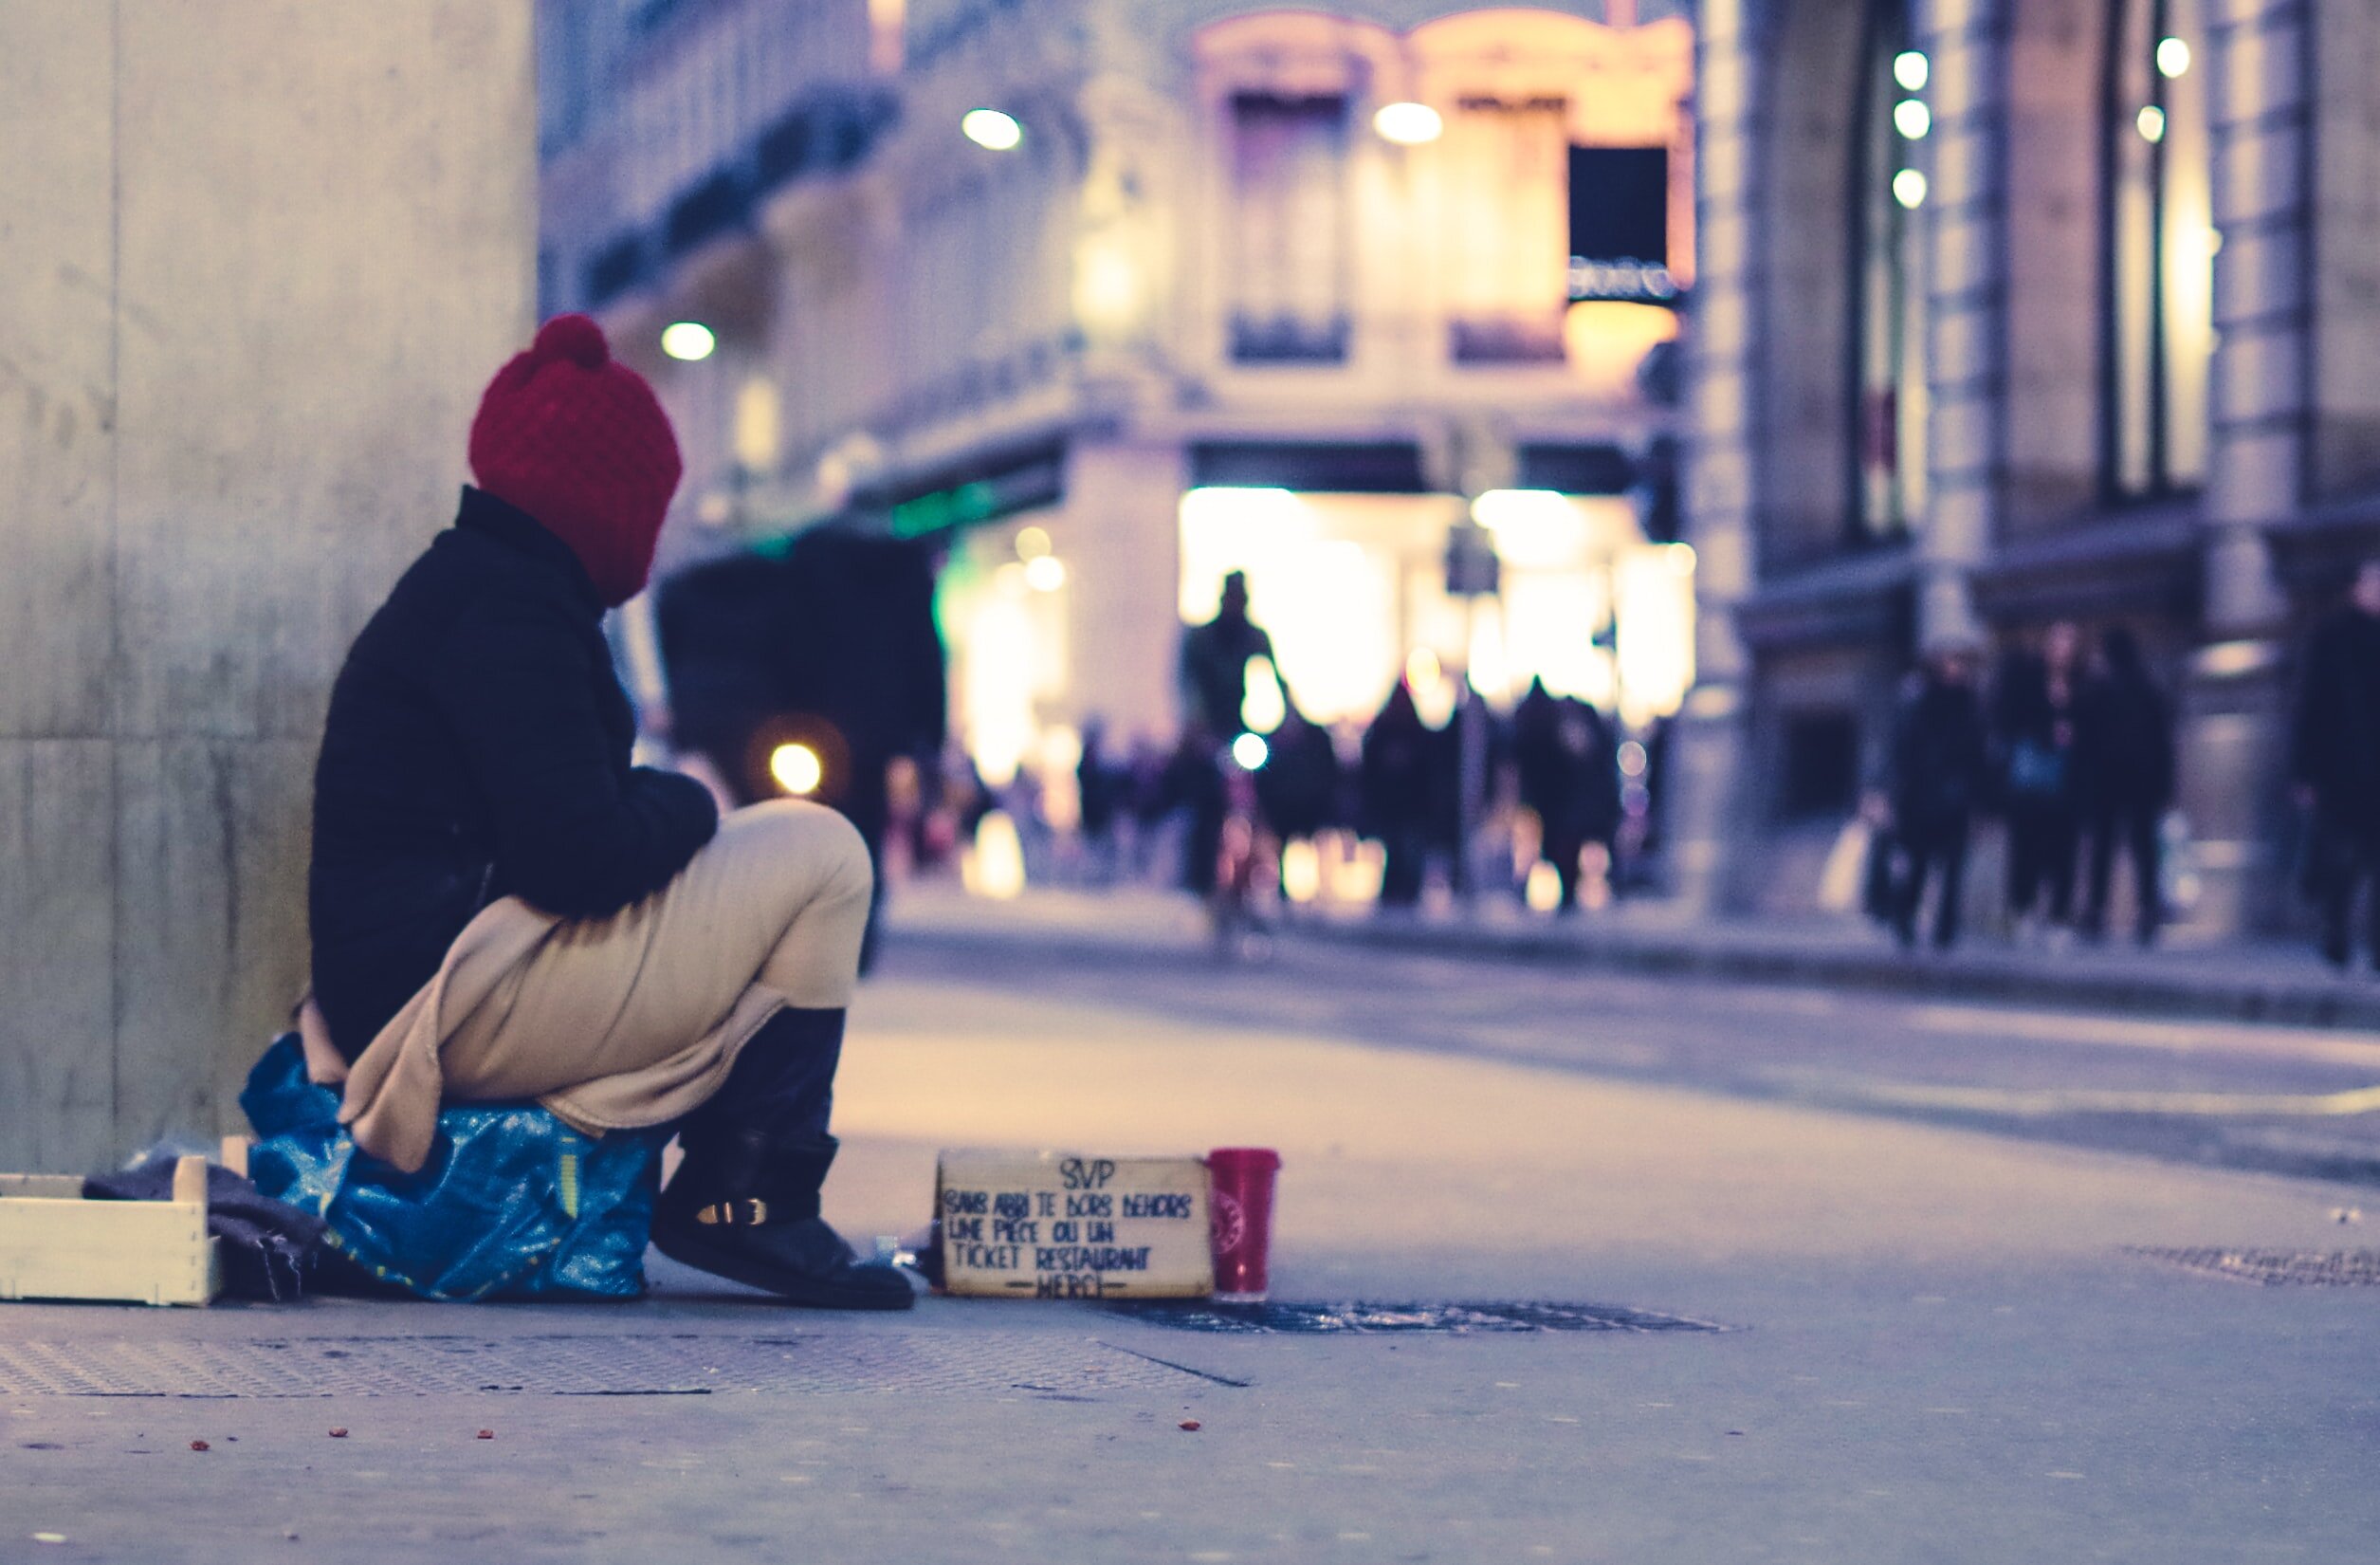 #Australian study finds increased risk of homelessness for youth leaving out-of-home care